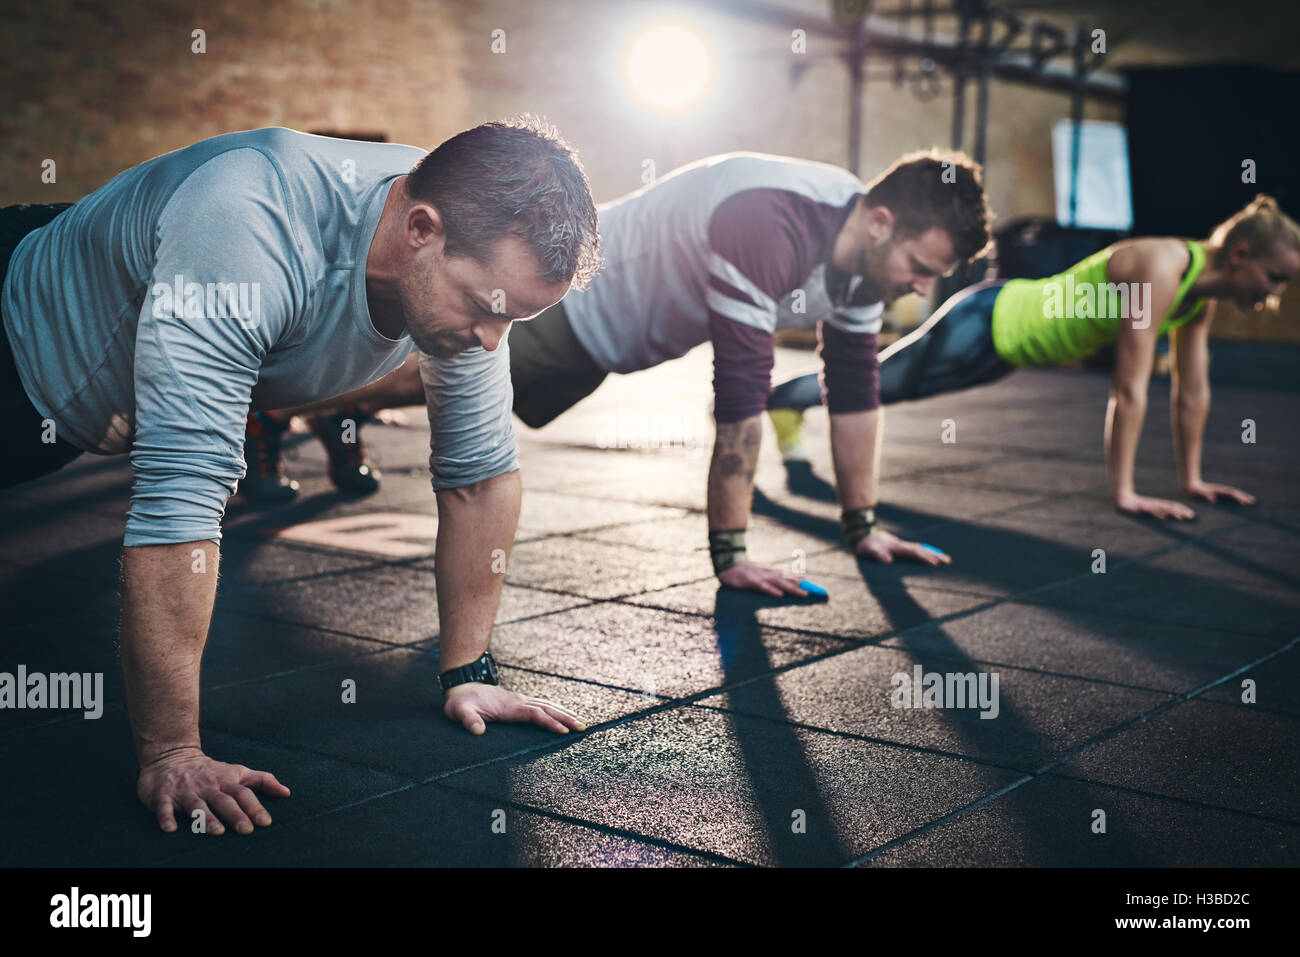 Group of adults performing push up exercise drills at indoor physical fitness cross-training exercise facility with bright light Stock Photo